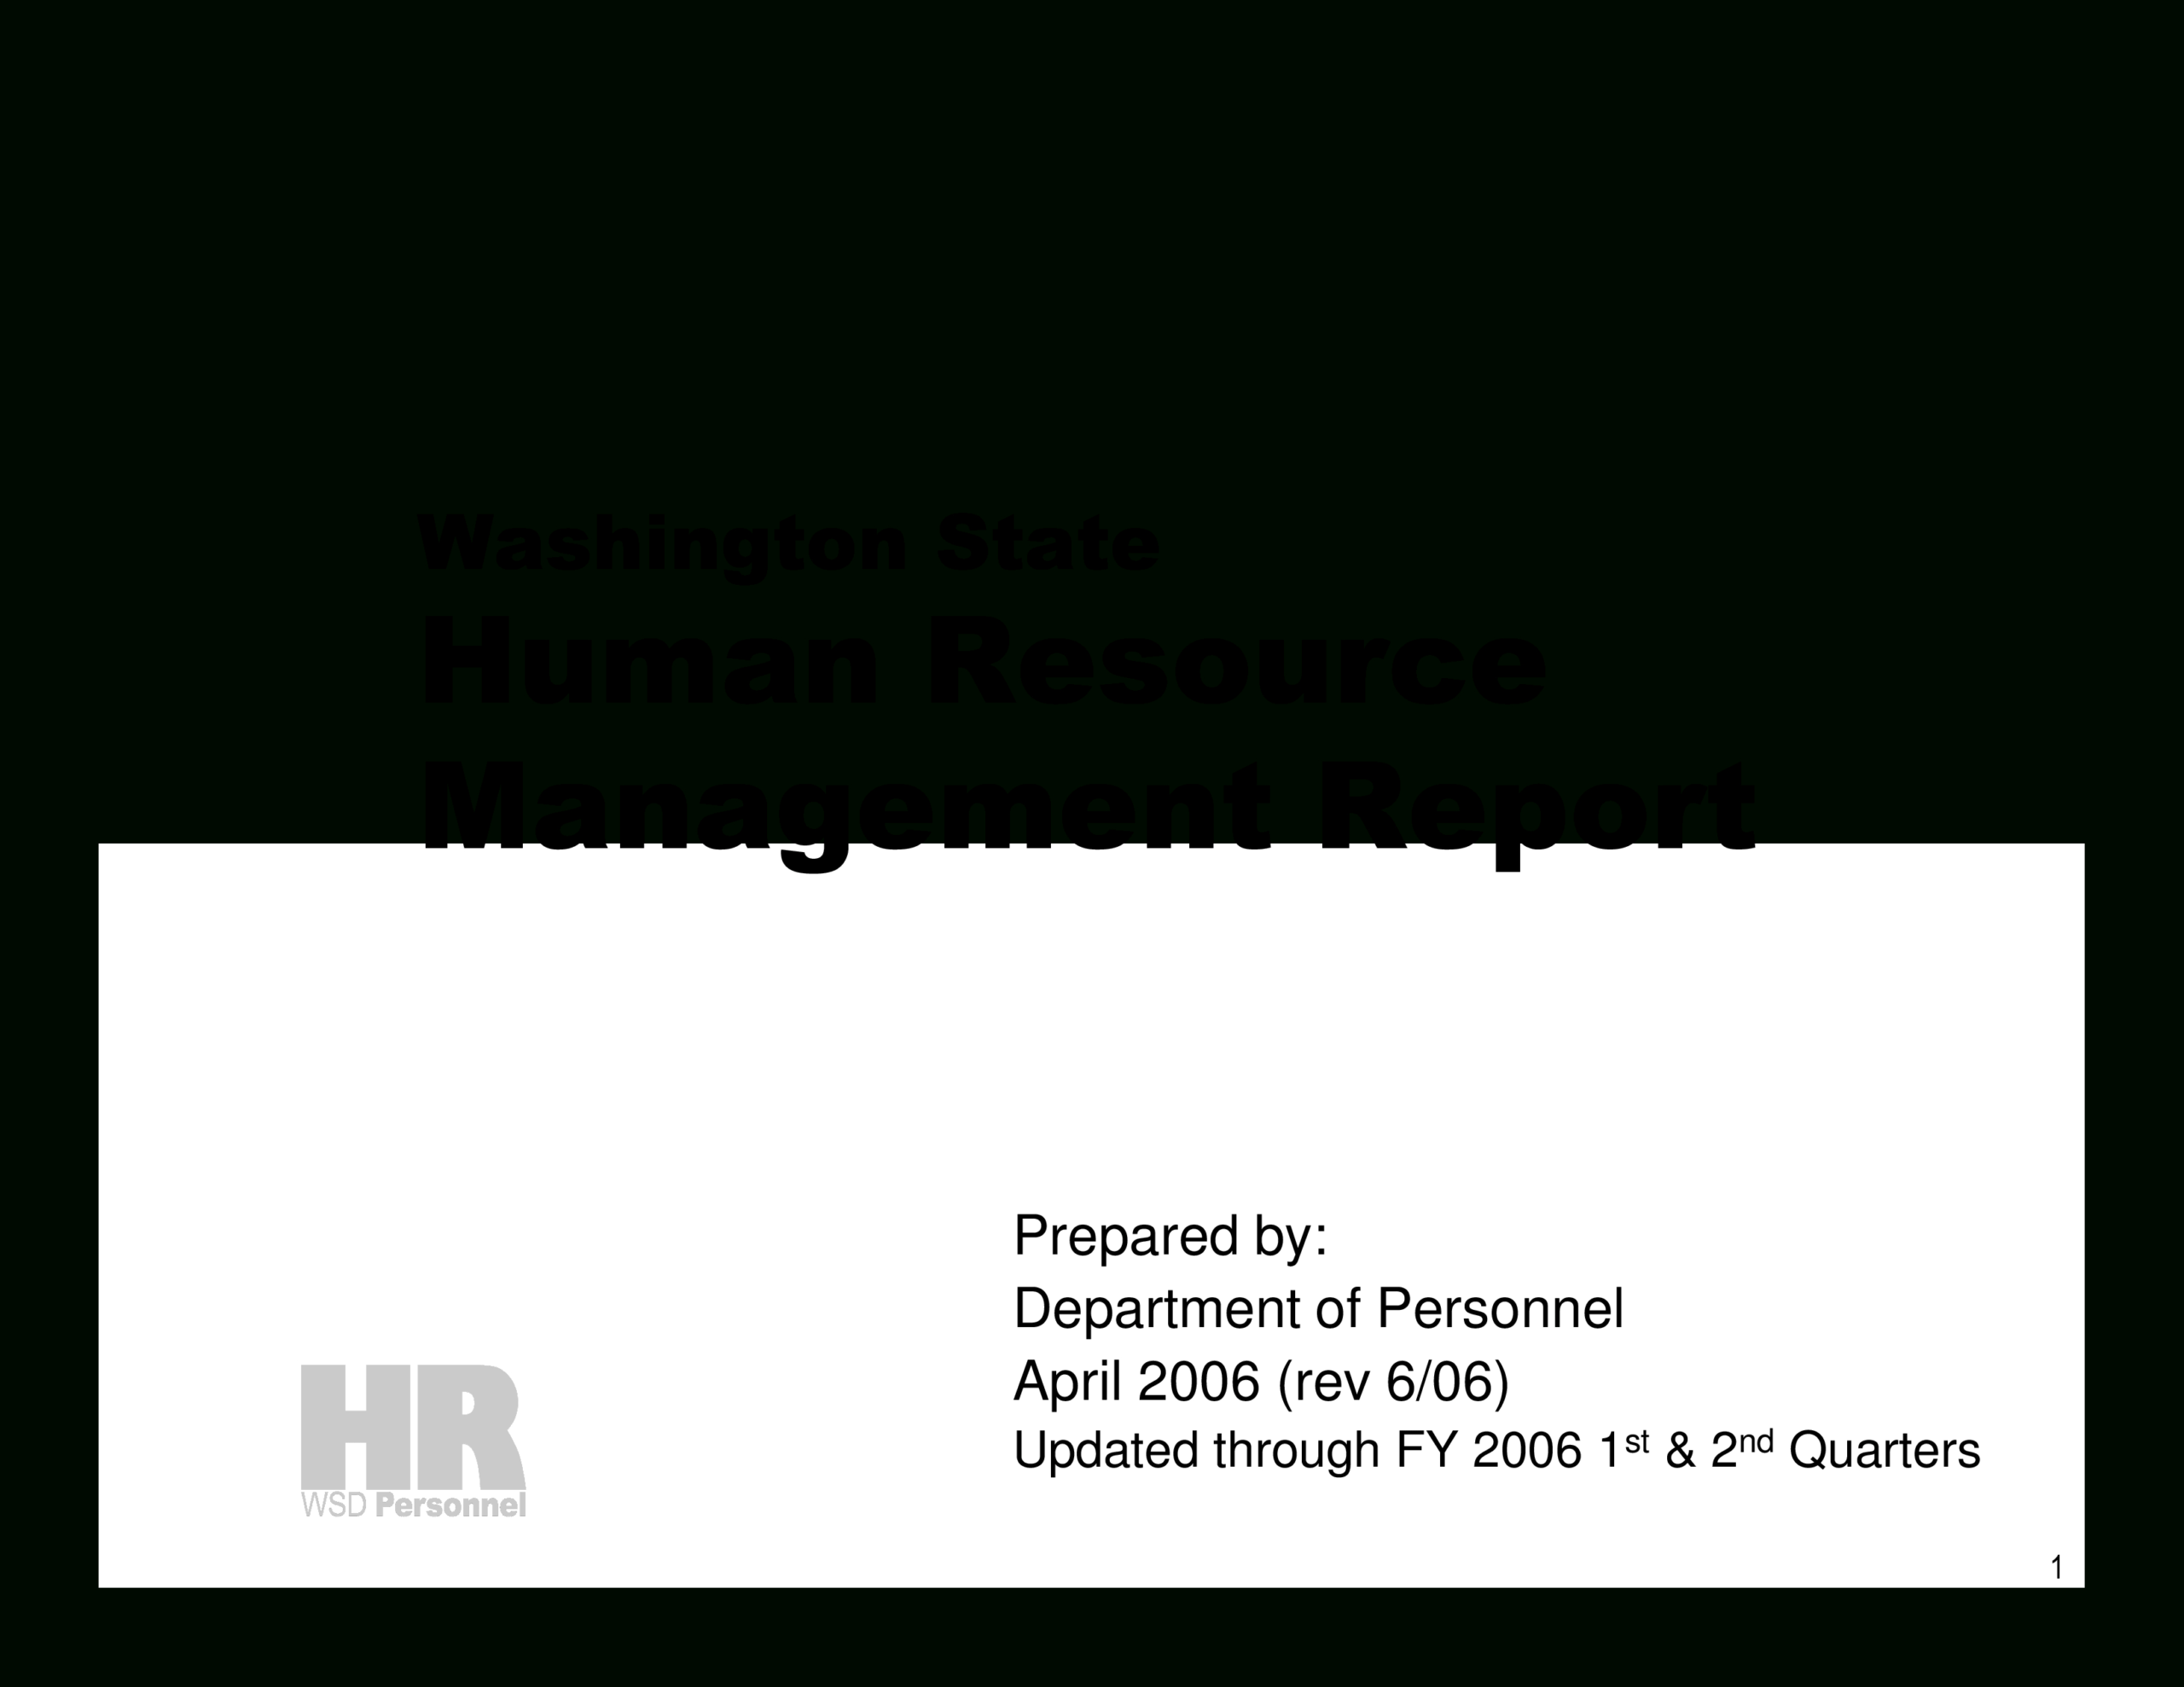 Hr Management Report | Templates At Allbusinesstemplates Inside Hr Management Report Template